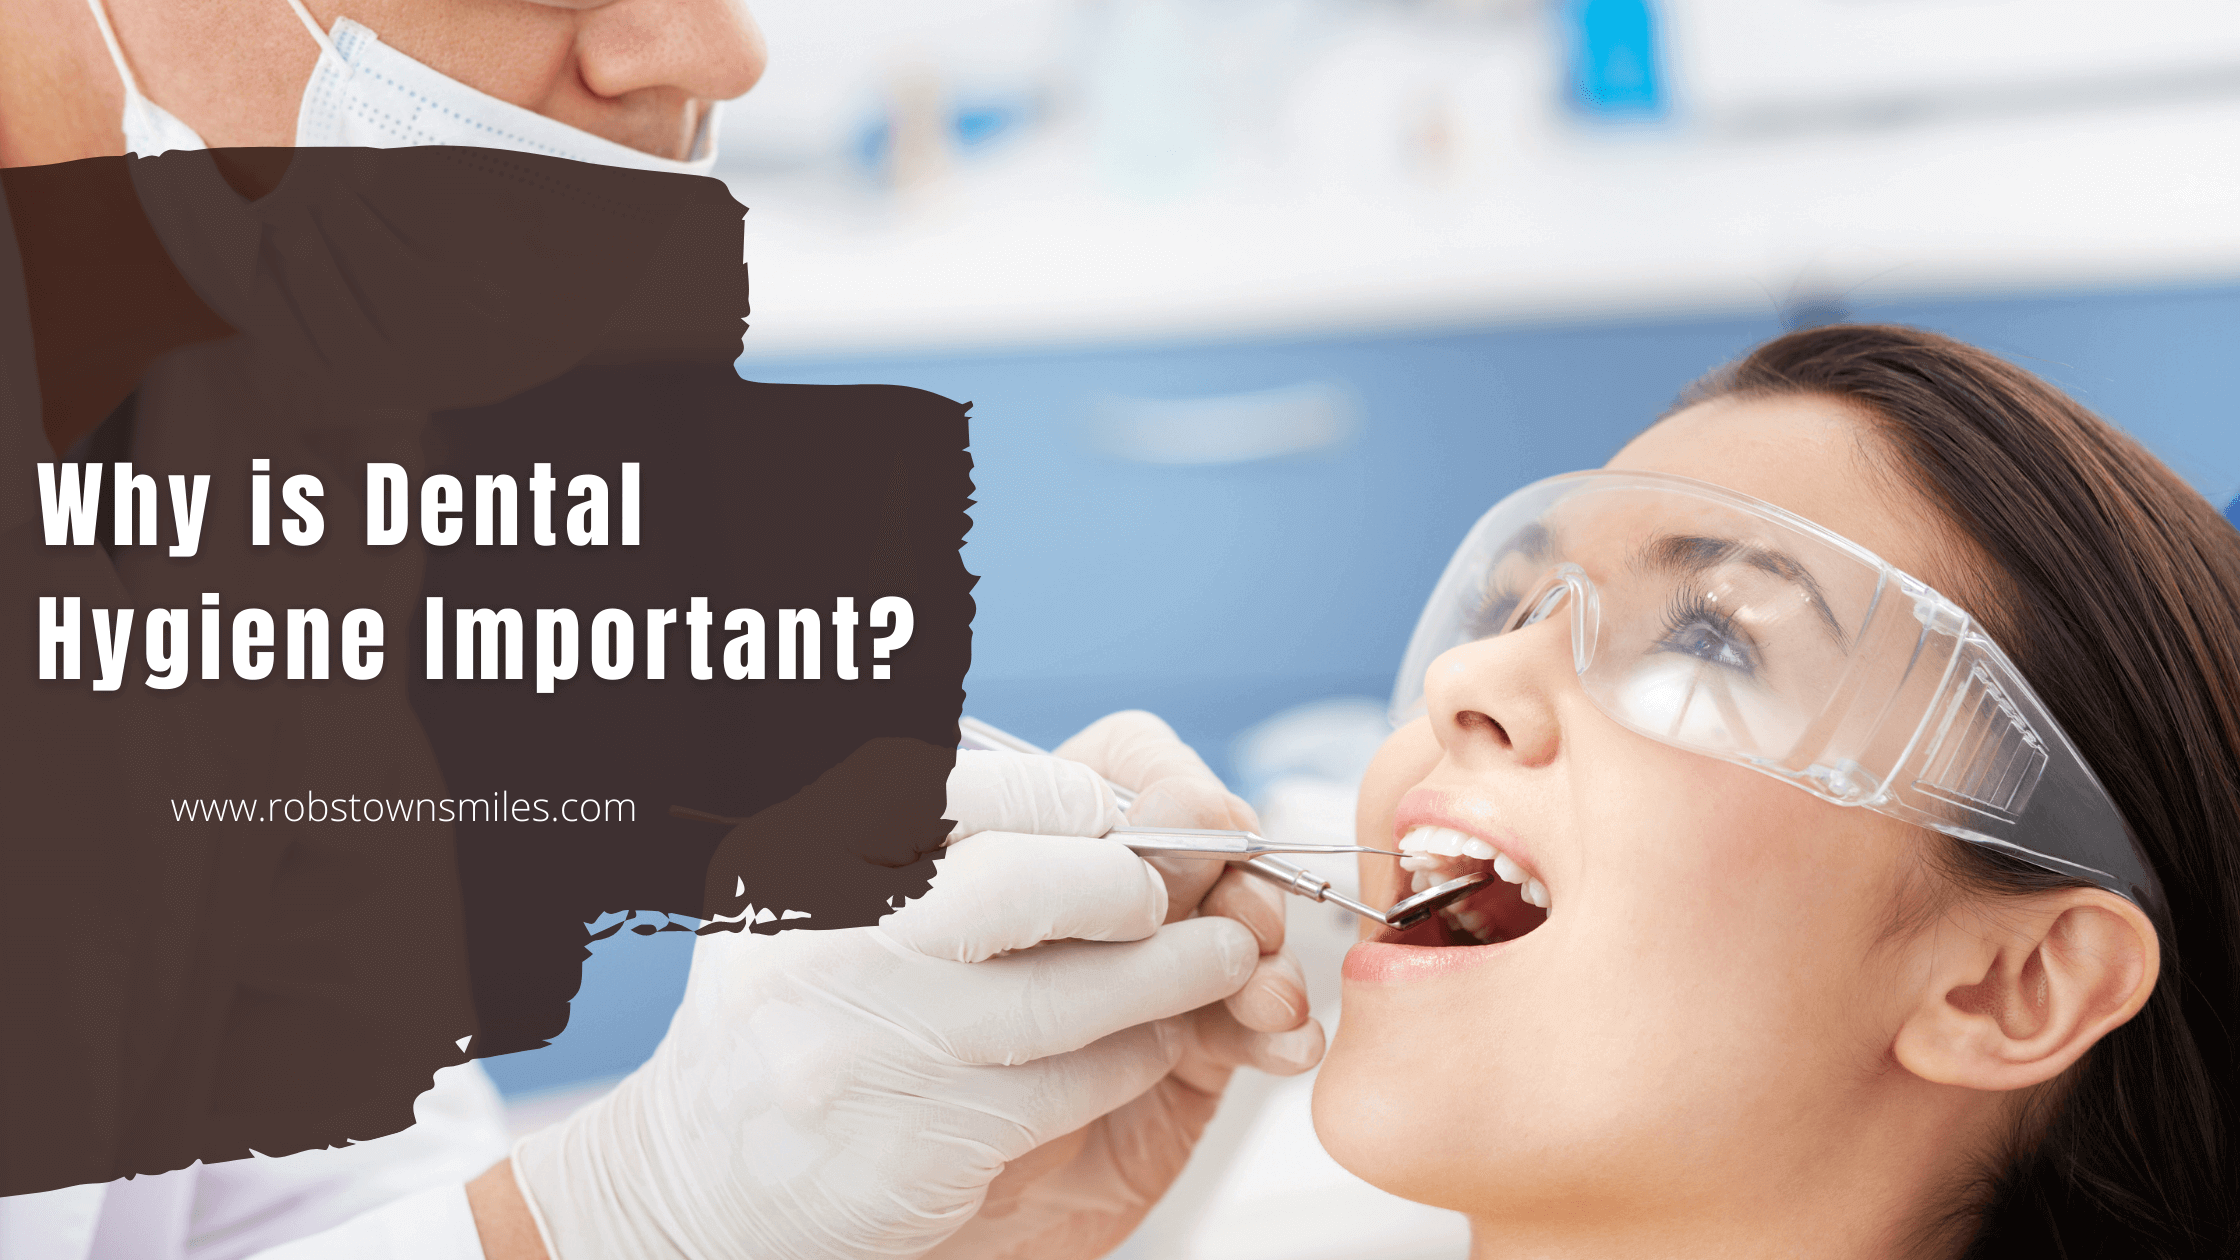 Why is Dental Hygiene Important?